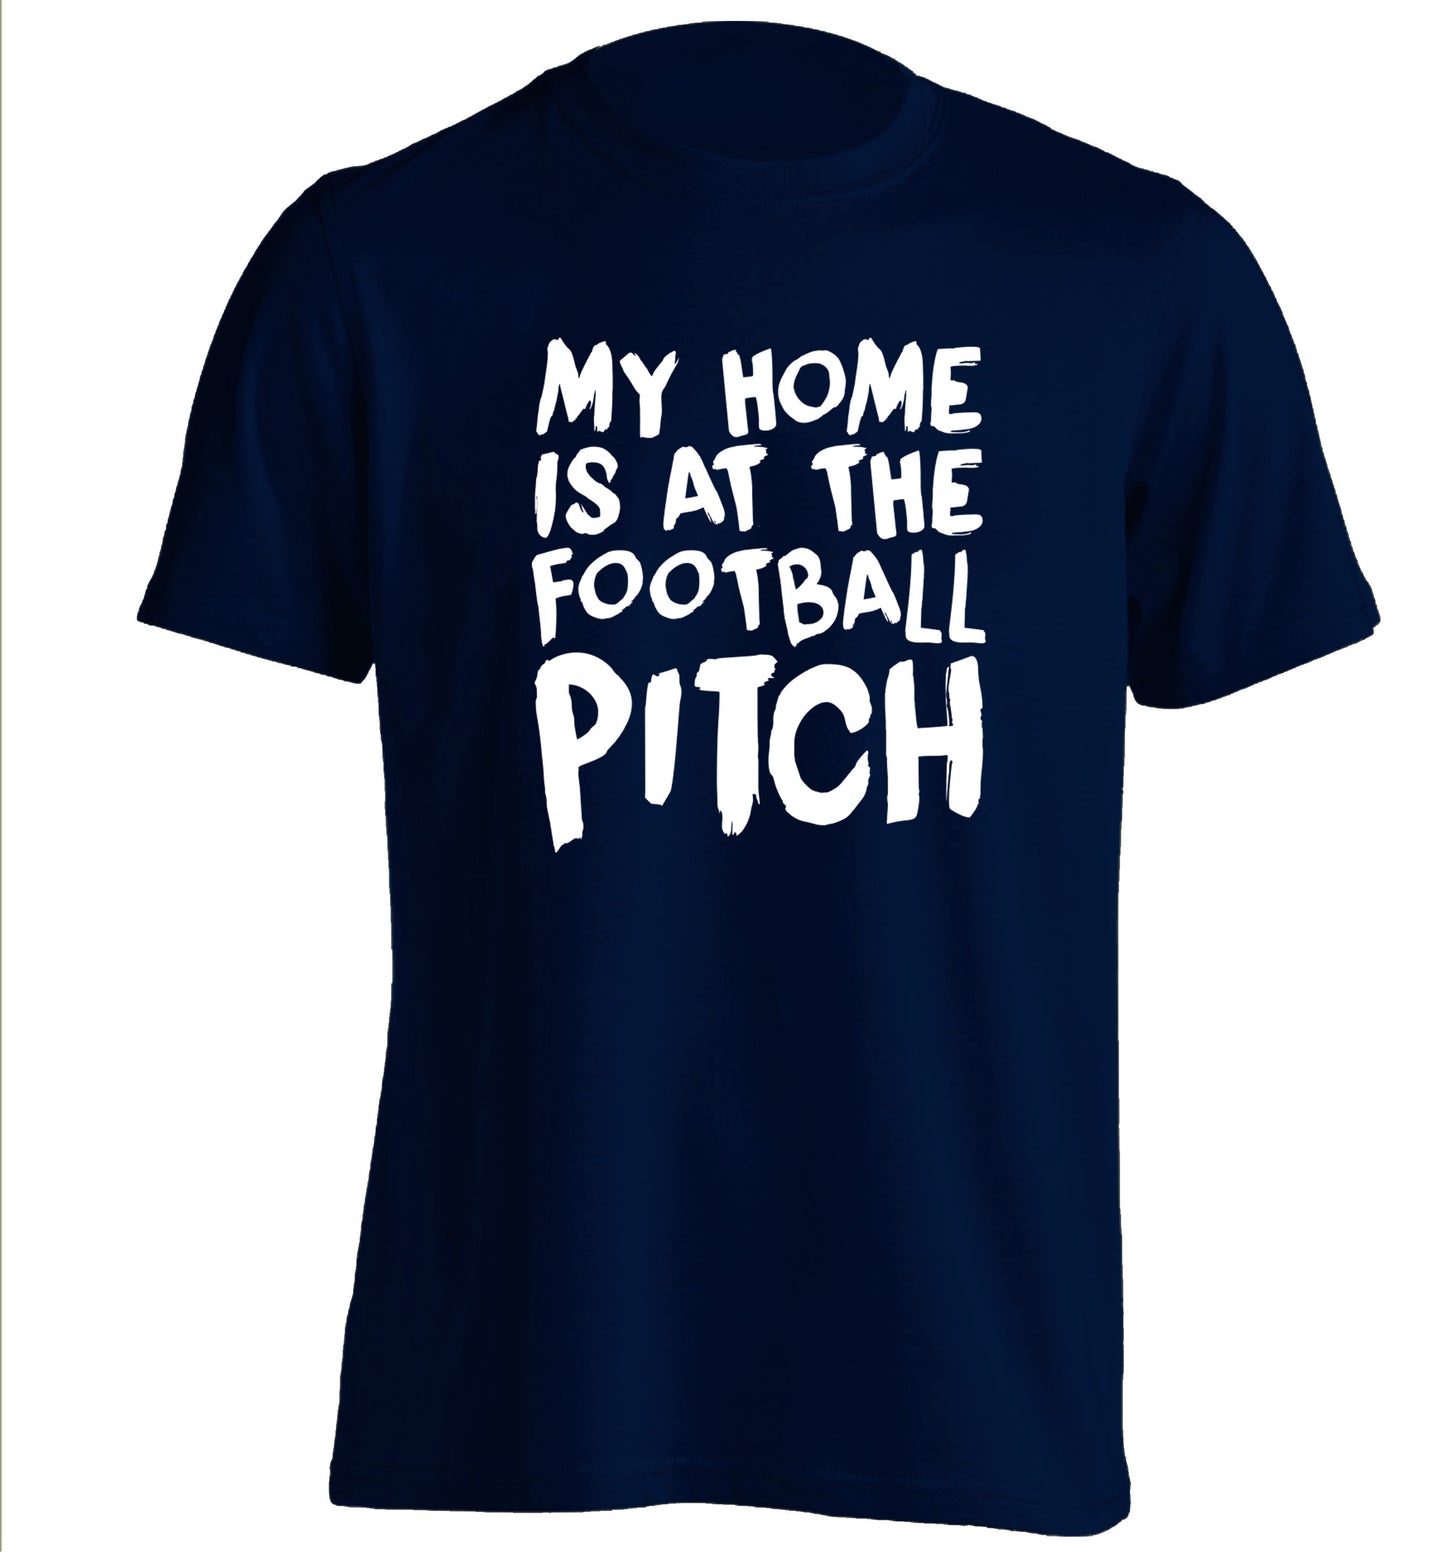 My home is at the football pitch adults unisex navy Tshirt 2XL